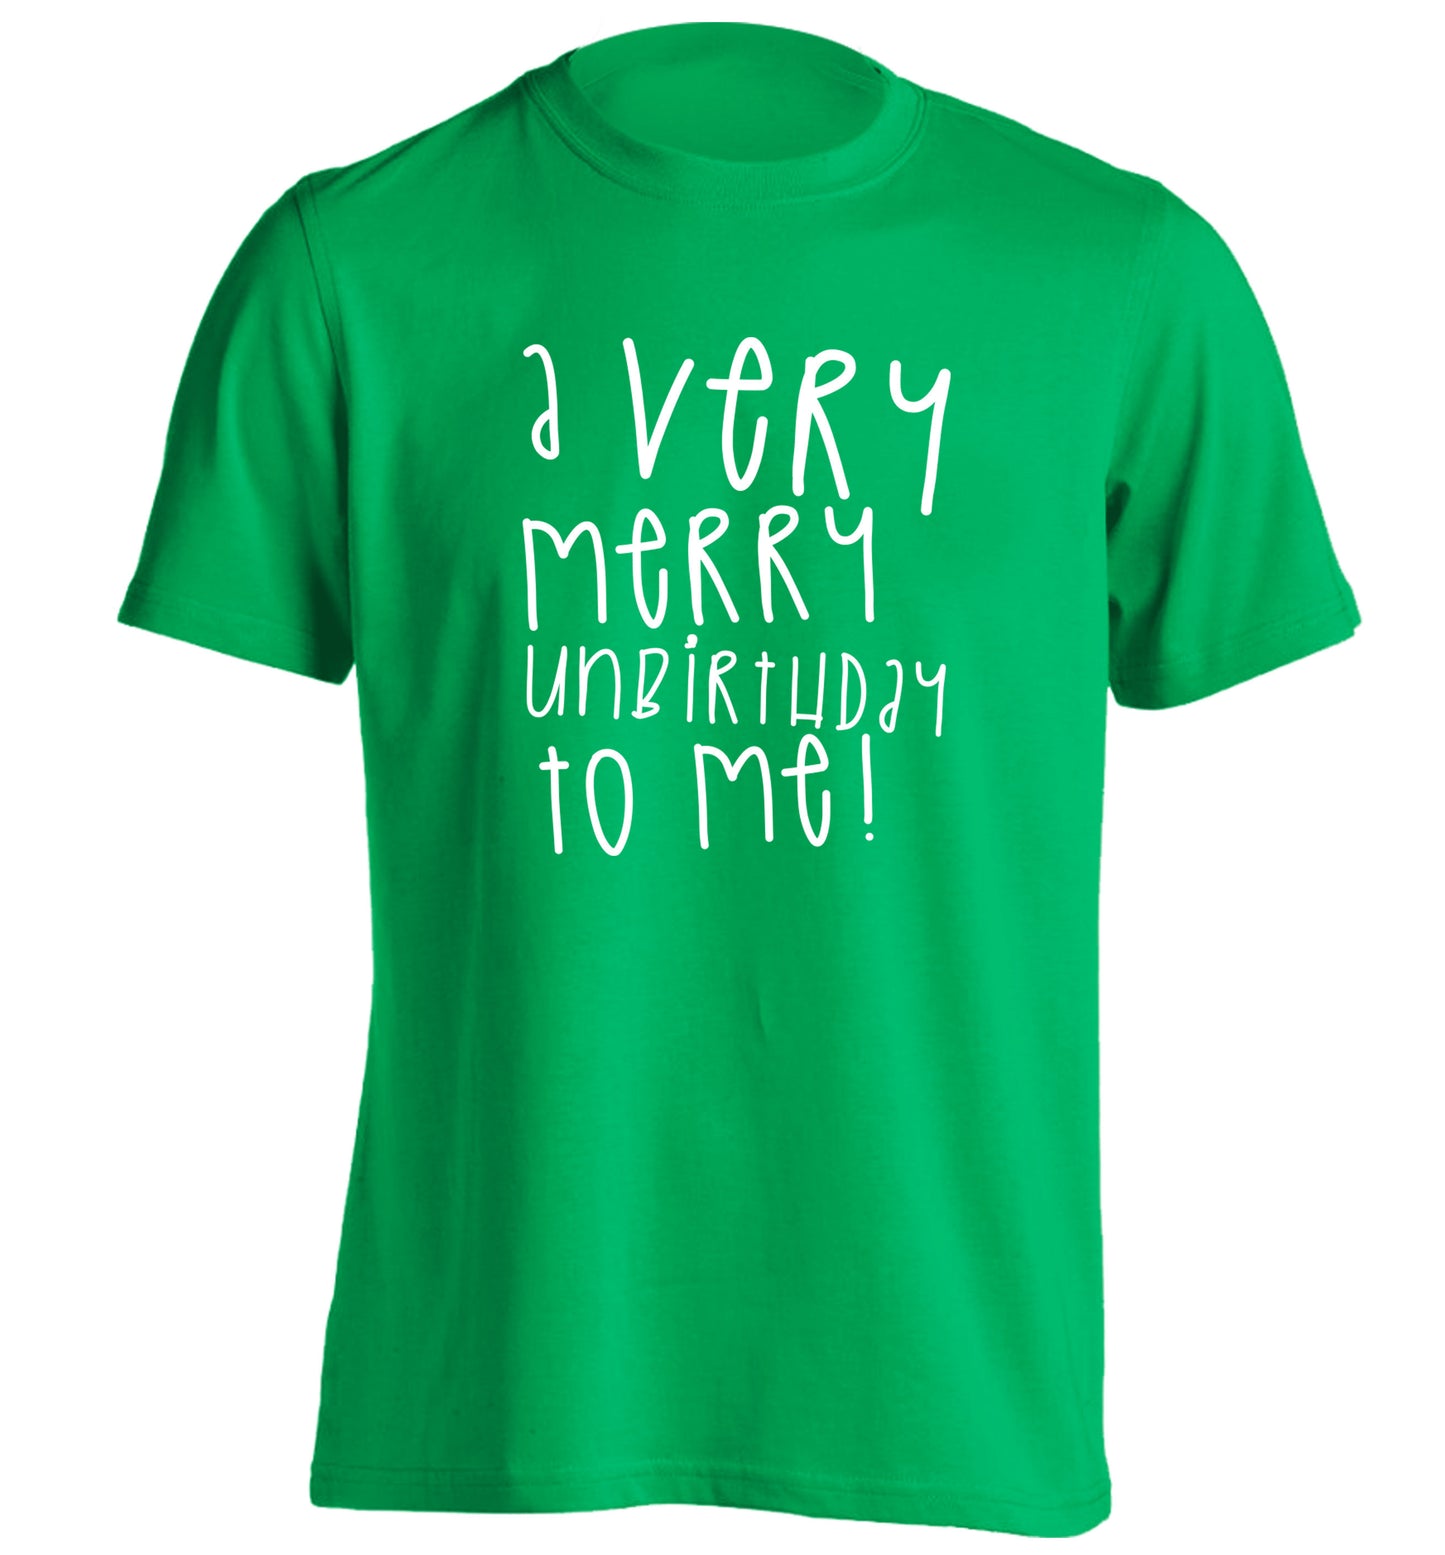 A very merry unbirthday to me! adults unisex green Tshirt 2XL